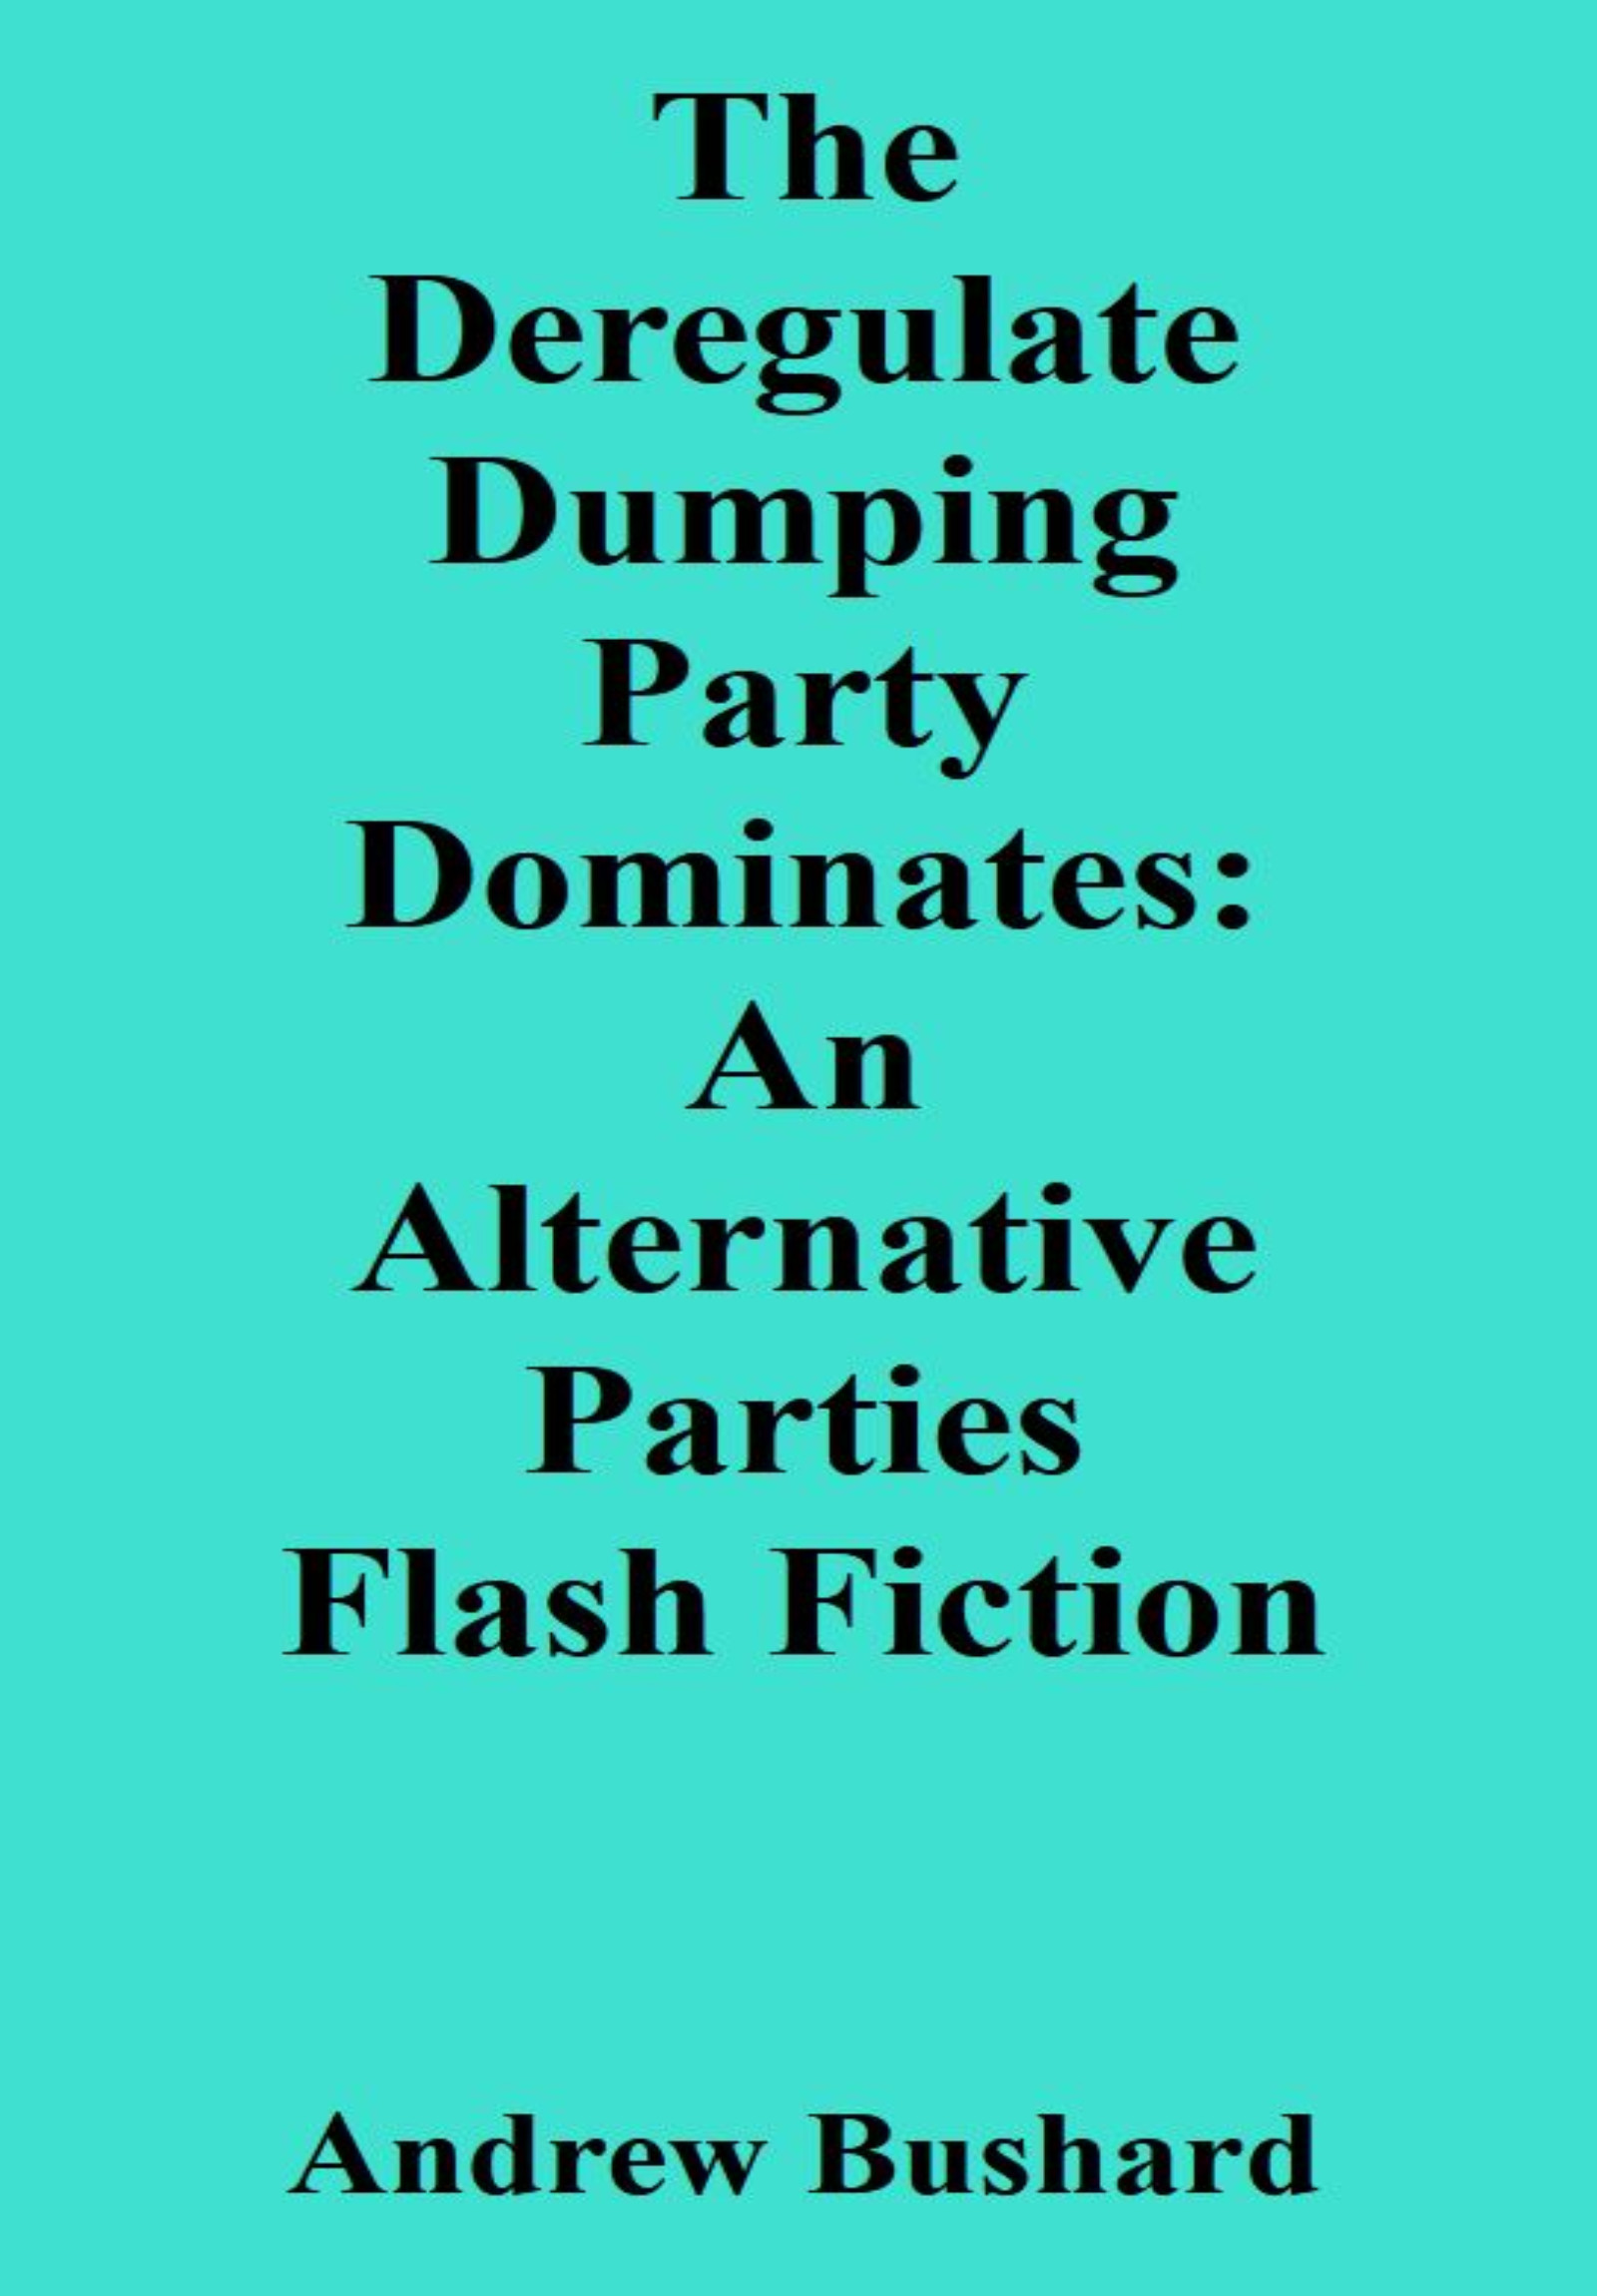 The Deregulate Dumping Party Dominates: An Alternative Parties Flash Fiction Audiobook